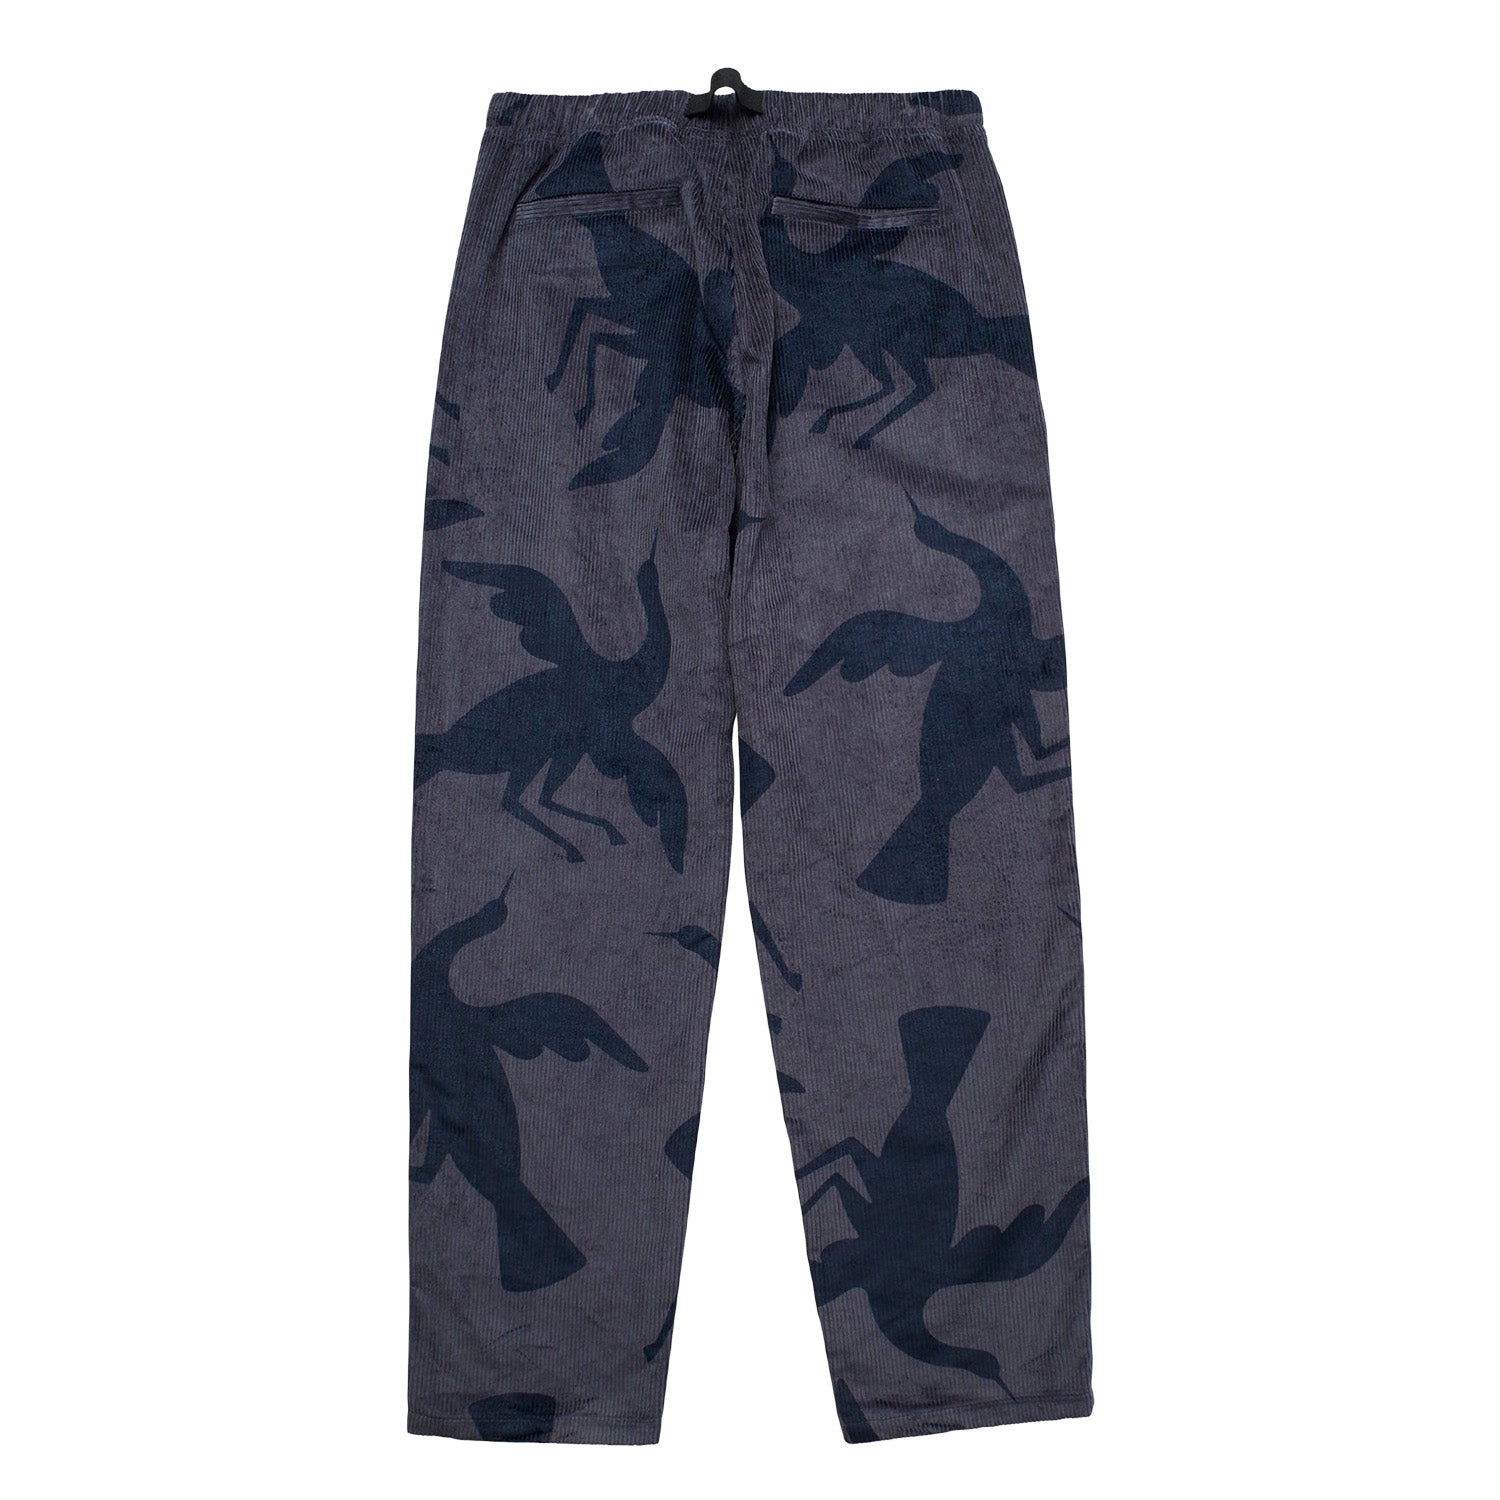 Parra clipped wings corduroy pants 'Greyish Blue'